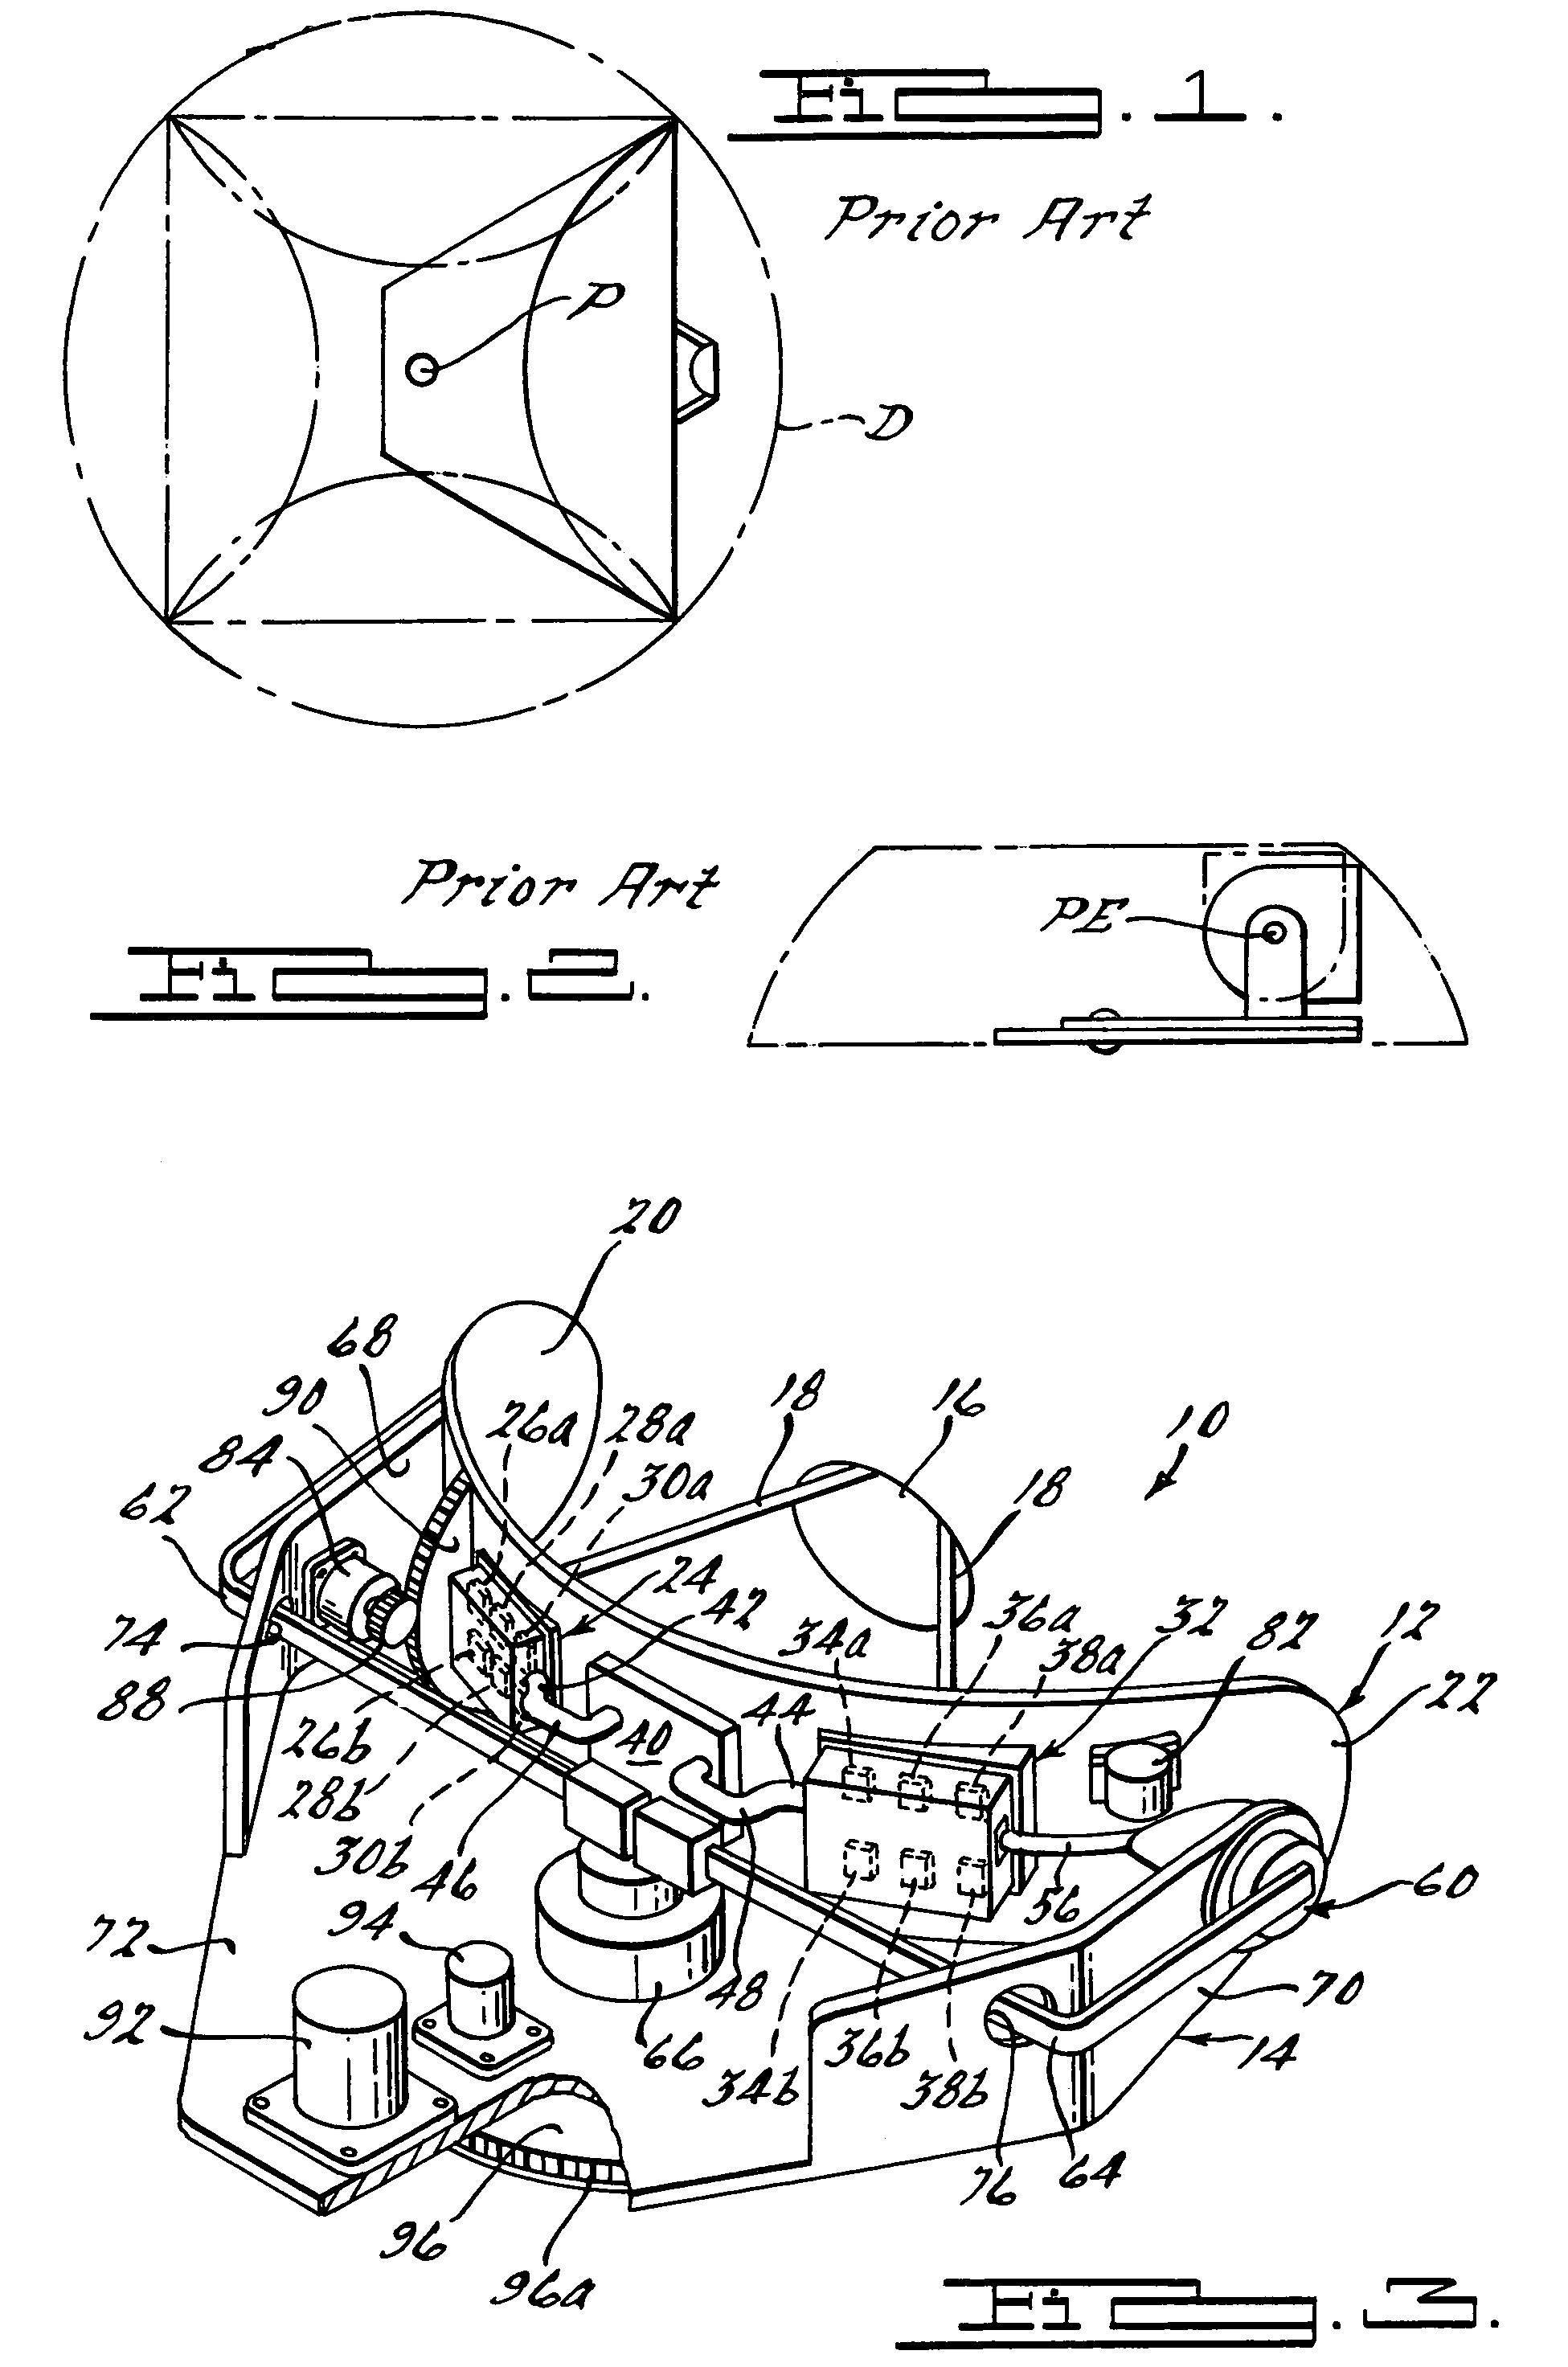 Compact, mechanically scanned cassegrain antenna system and method